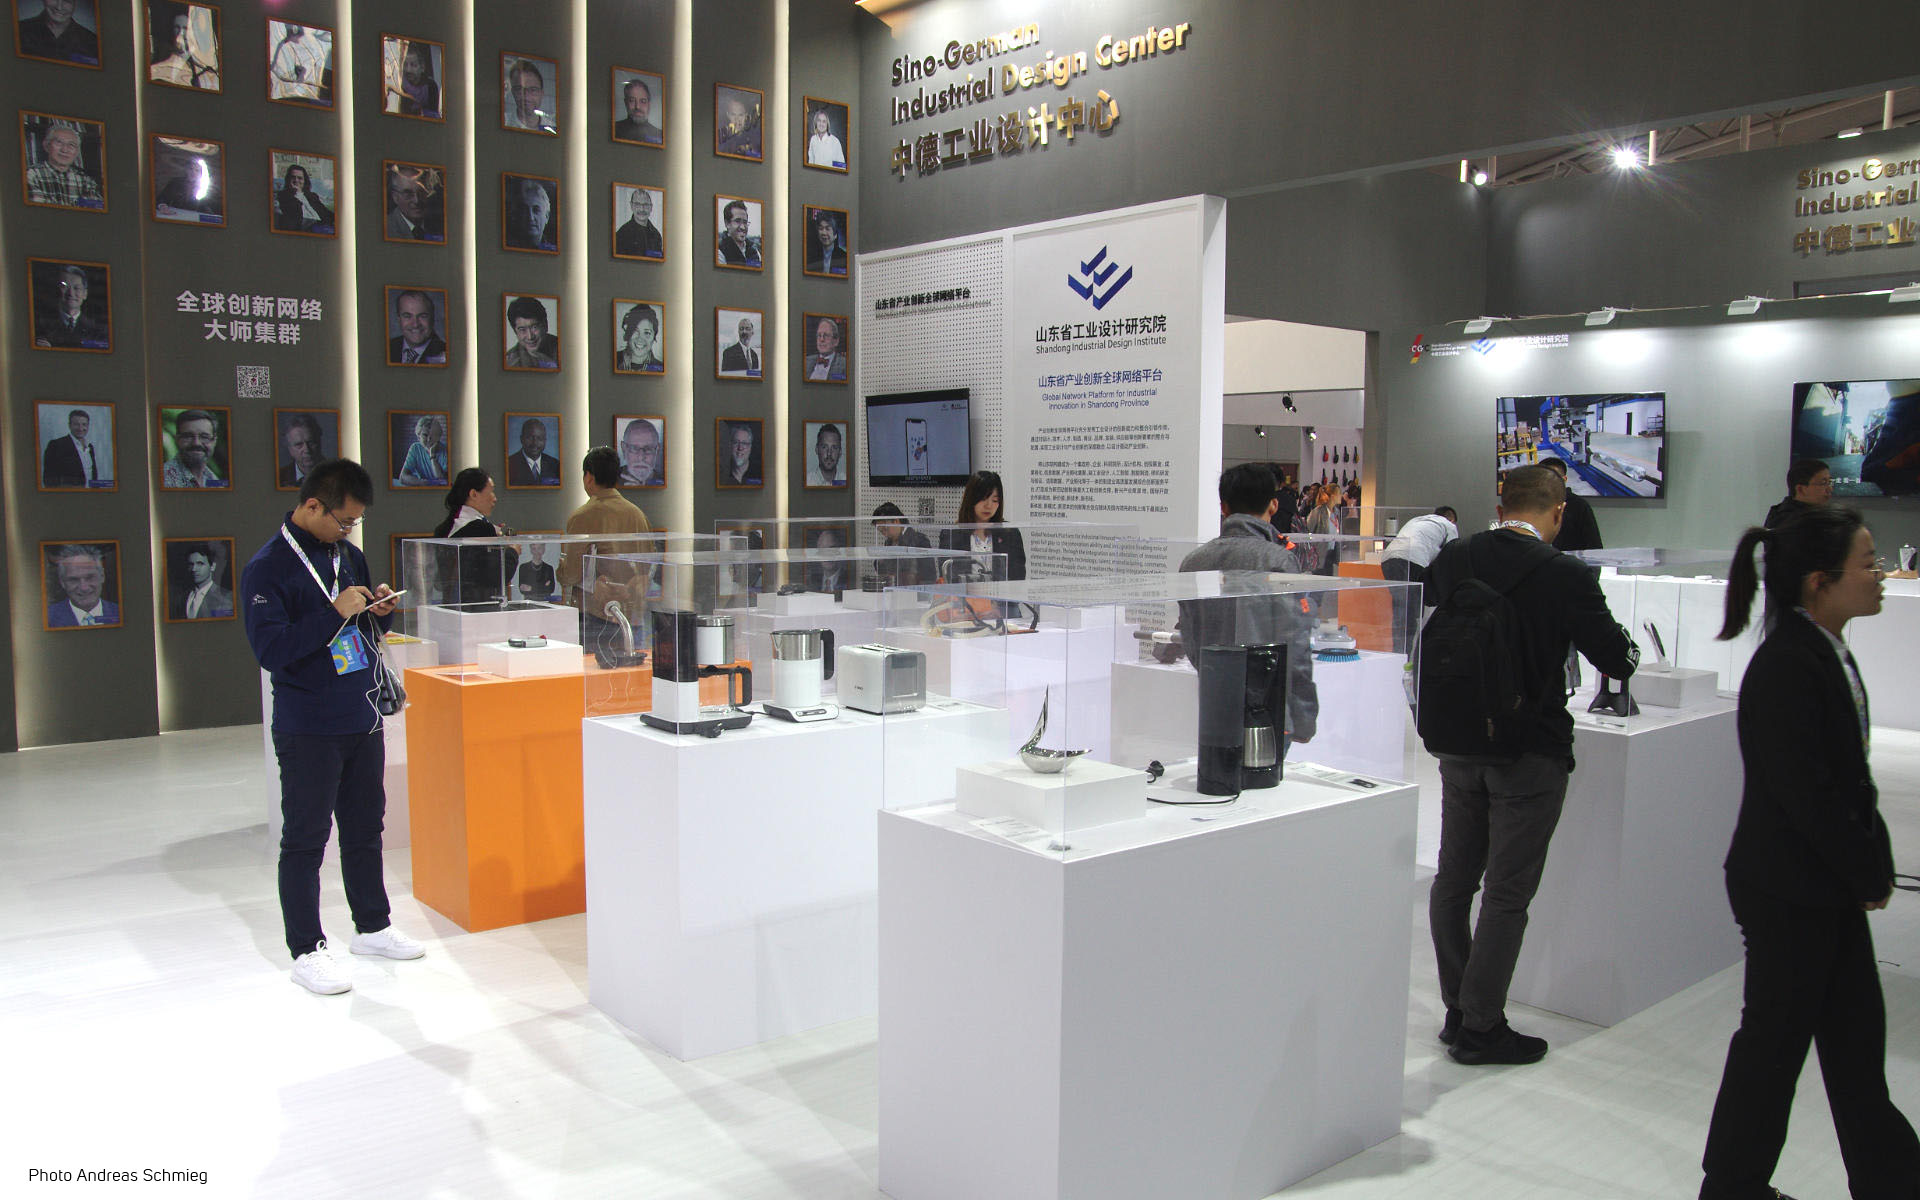 daniels + erdwiens industrial design exhibition on the World Industrial Design Conference 2019 in Yantai